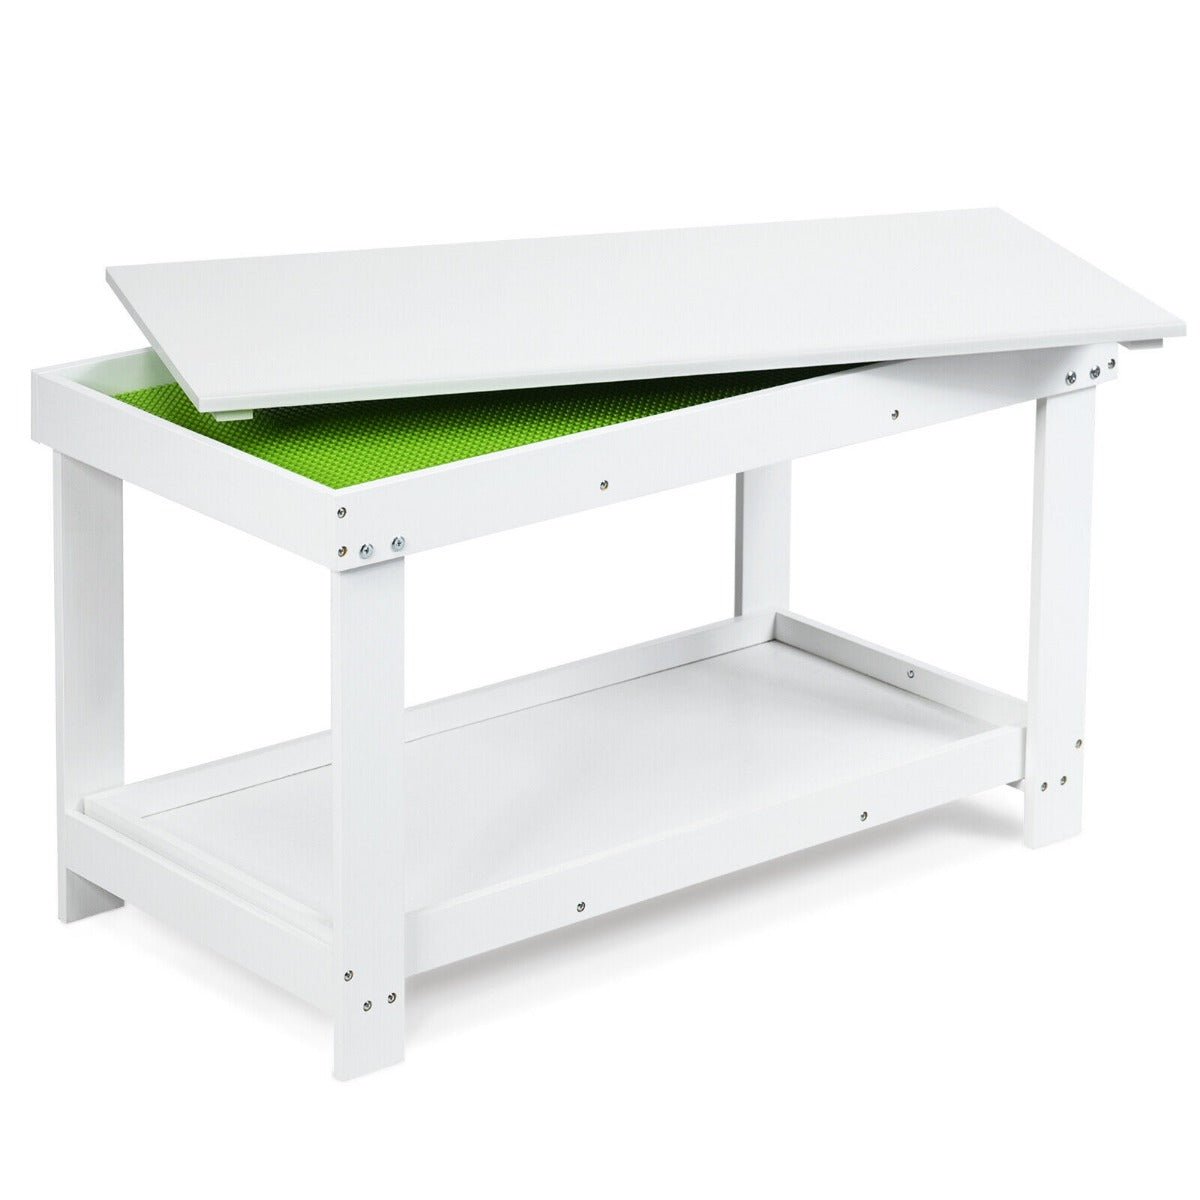 Shop White Wooden Kids Activity Table with Storage Shelf and Removable Top